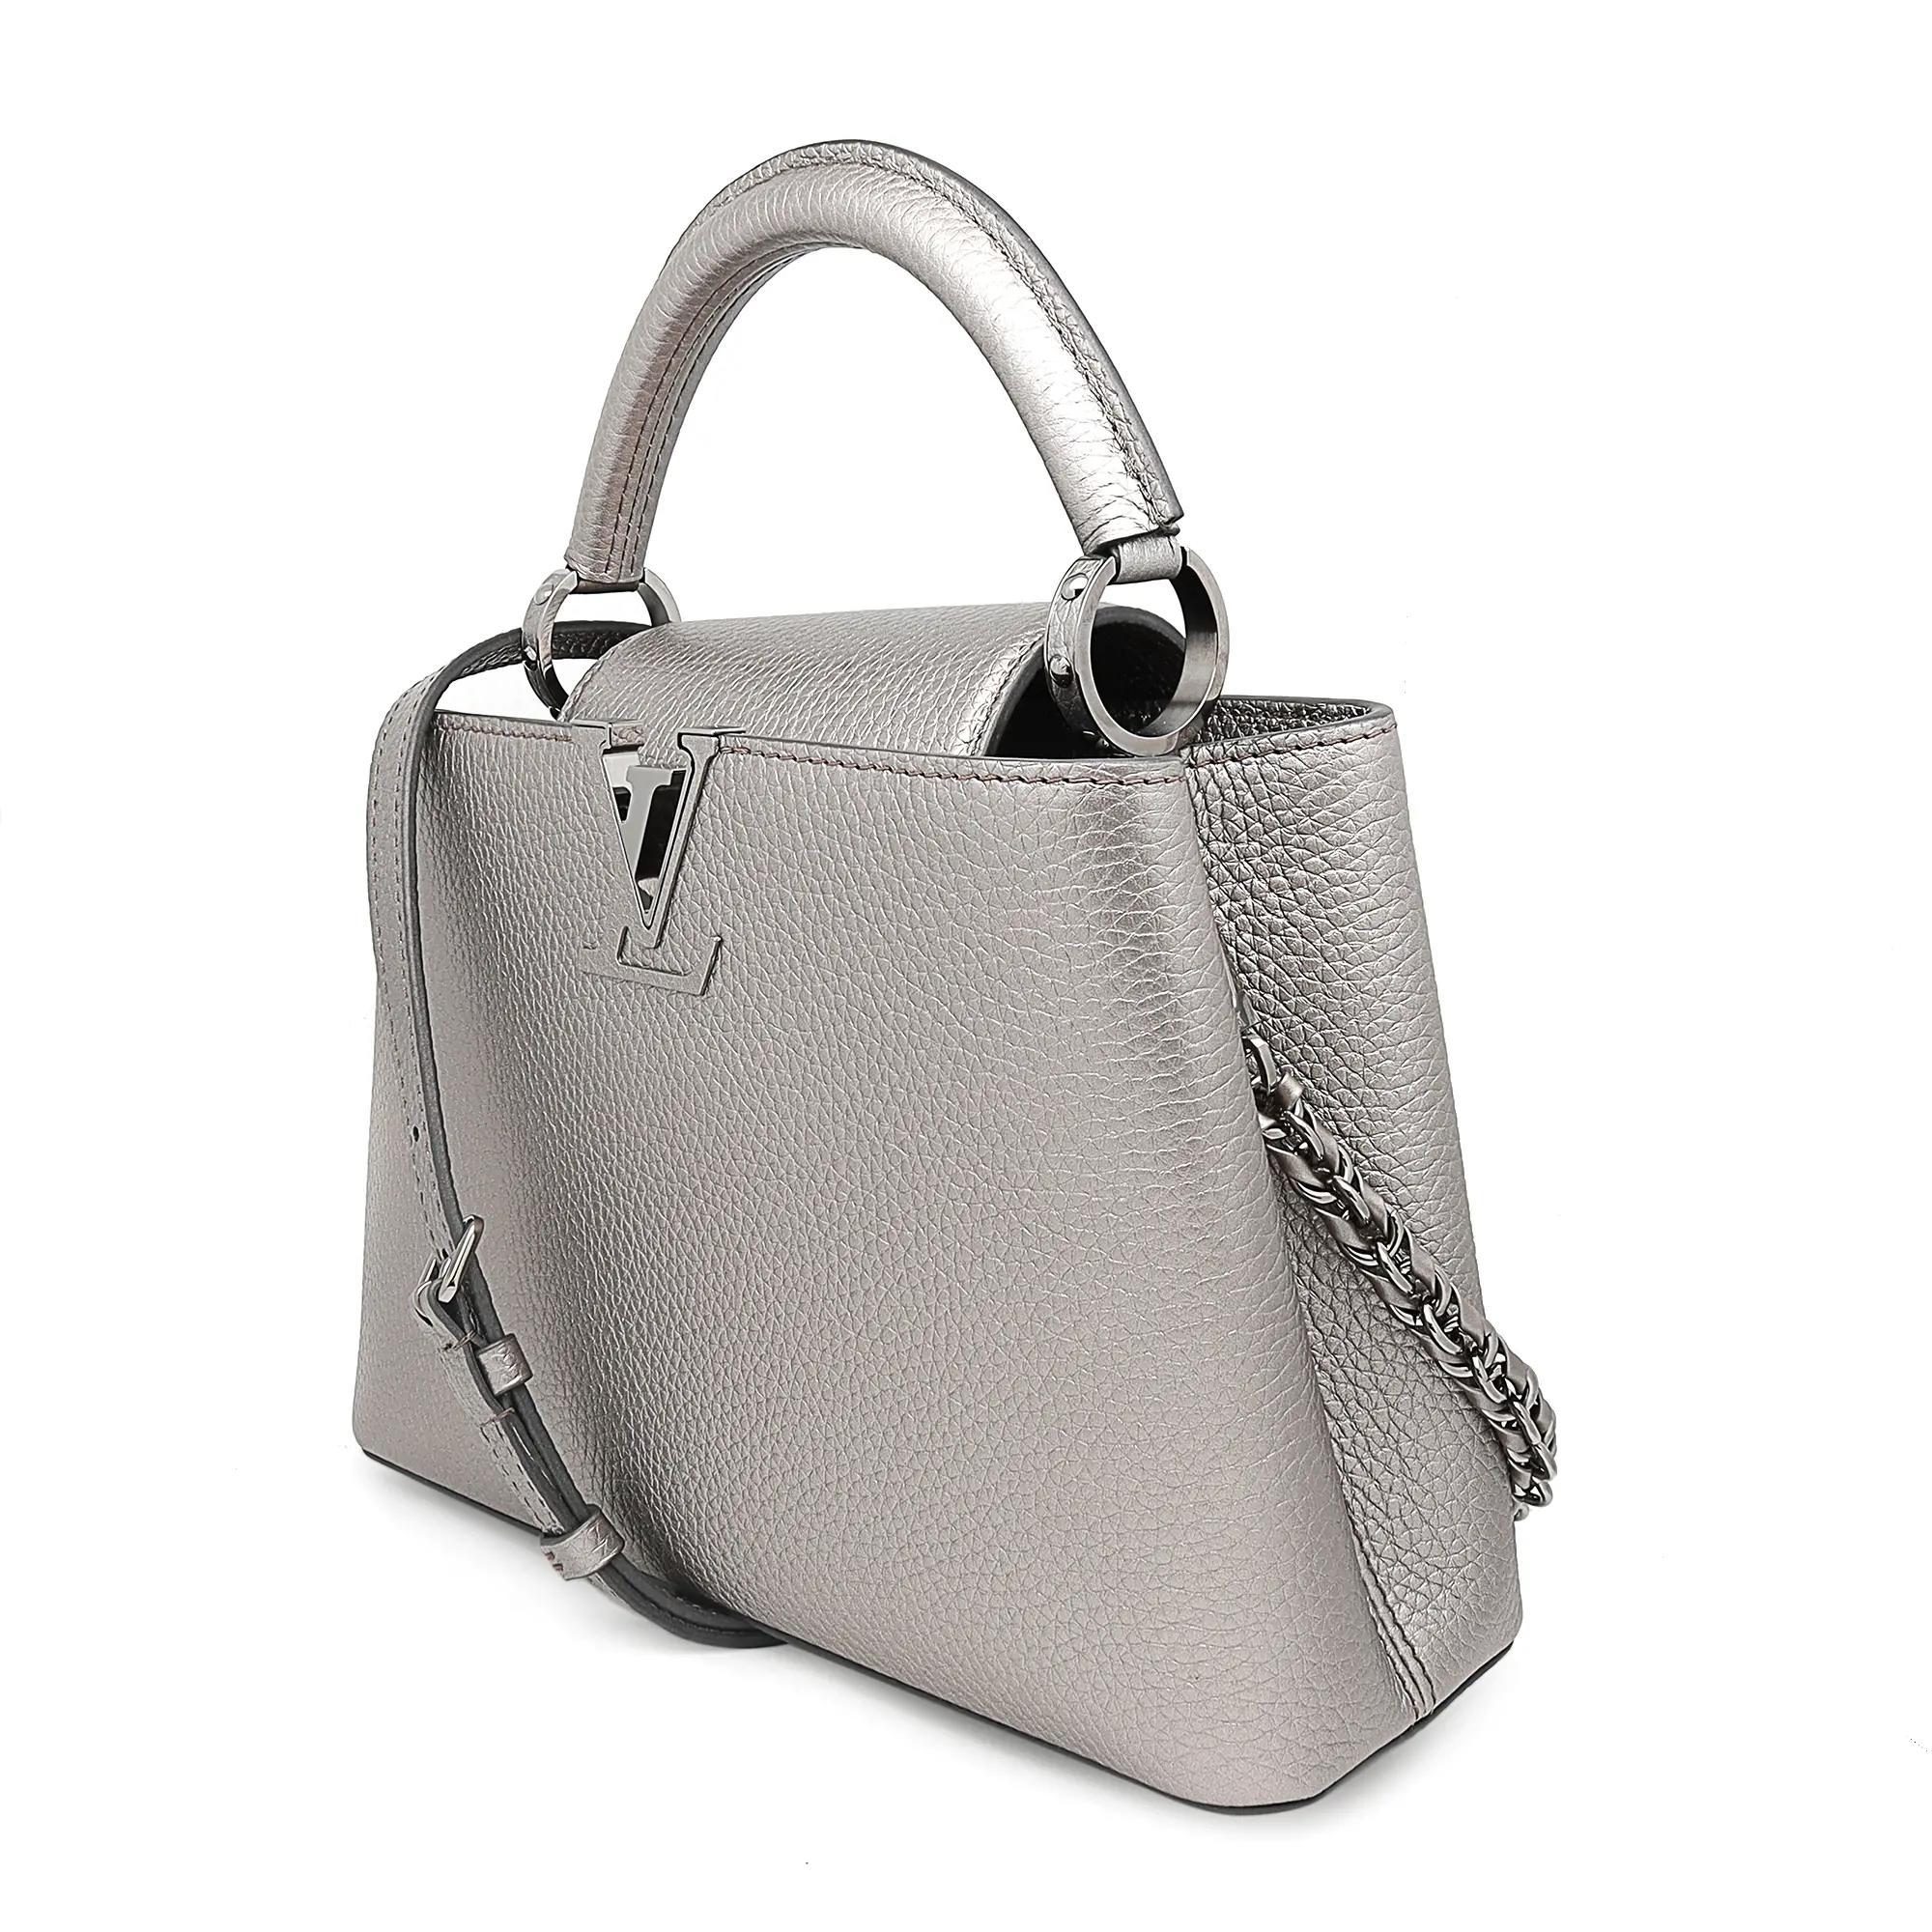 Louis Vuitton Capucines BB Metallic Grey Top Handle Handbag. This beautiful shoulder bag is composed of luxurious textured Taurilloun leather in metallic grey. The handbag features a single rolled leather reinforced top handle with stylized links